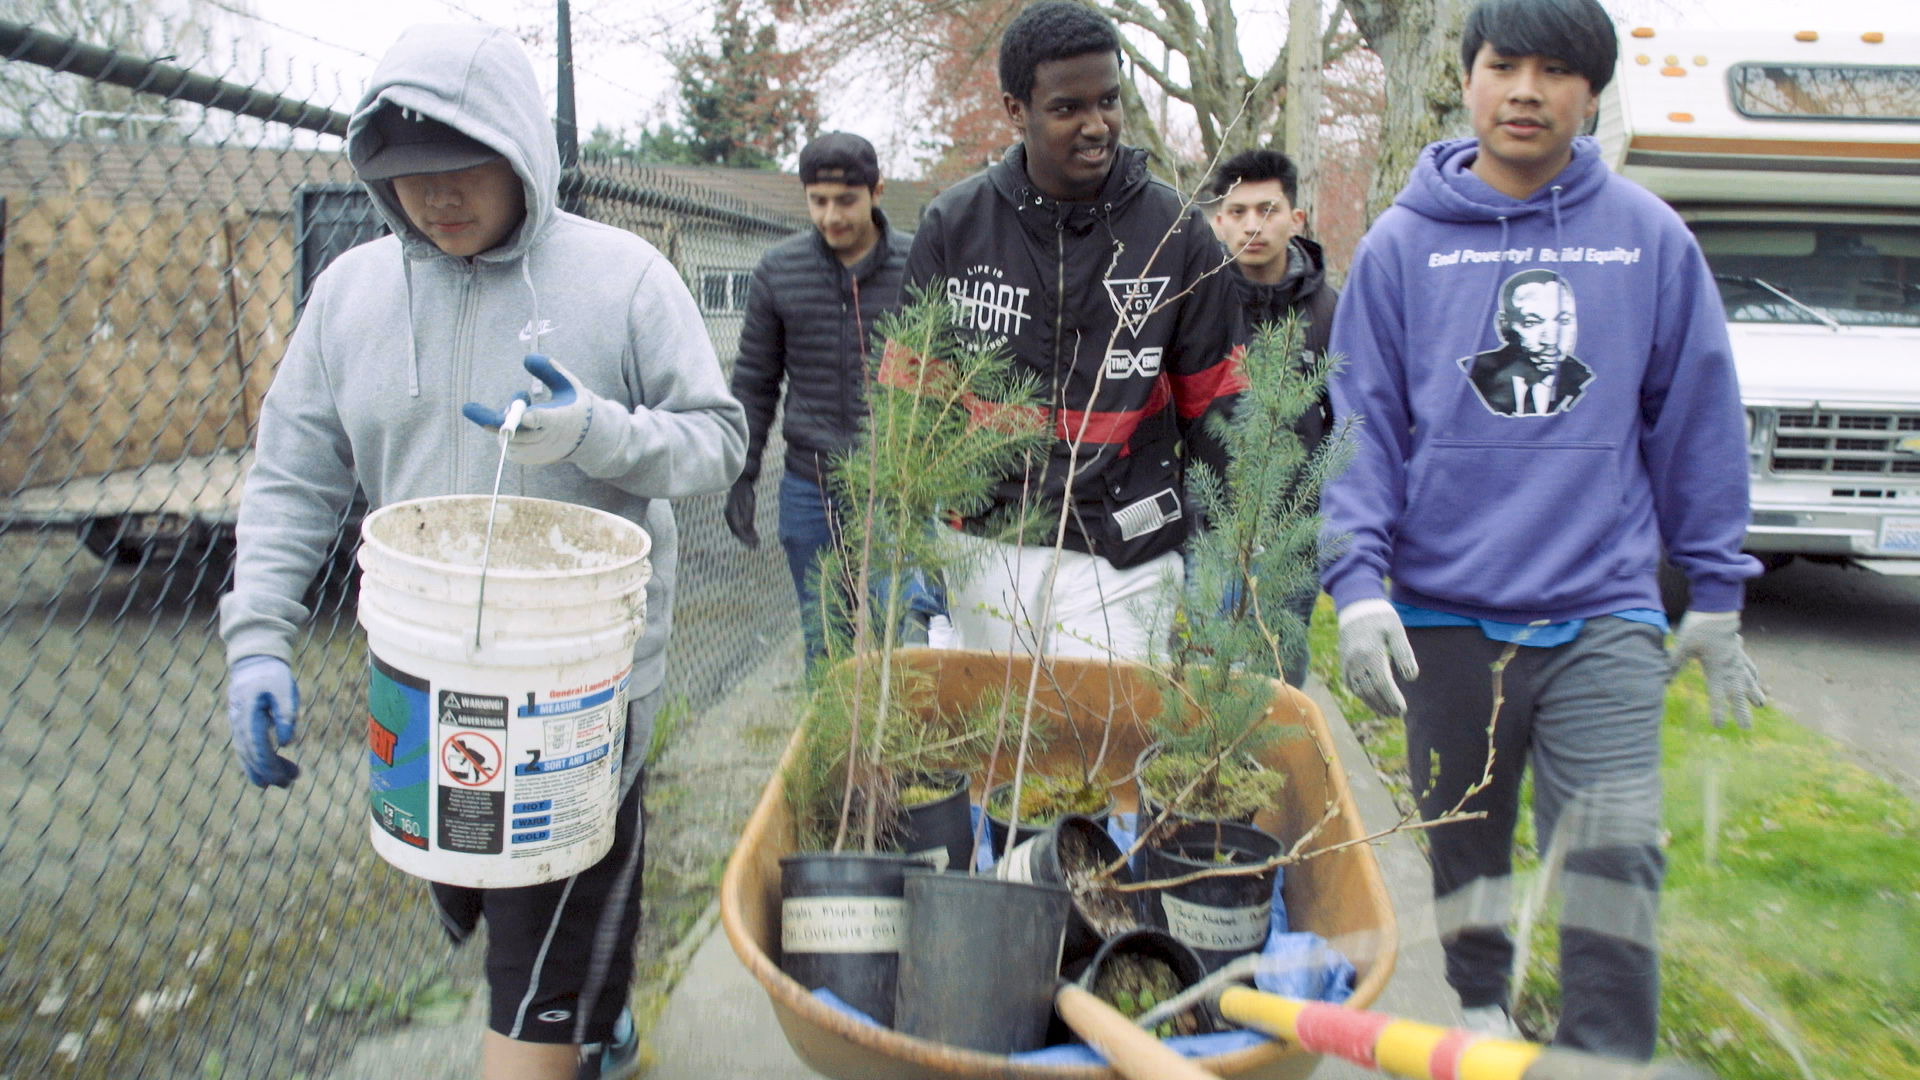 Teens with saplings and tools for planting